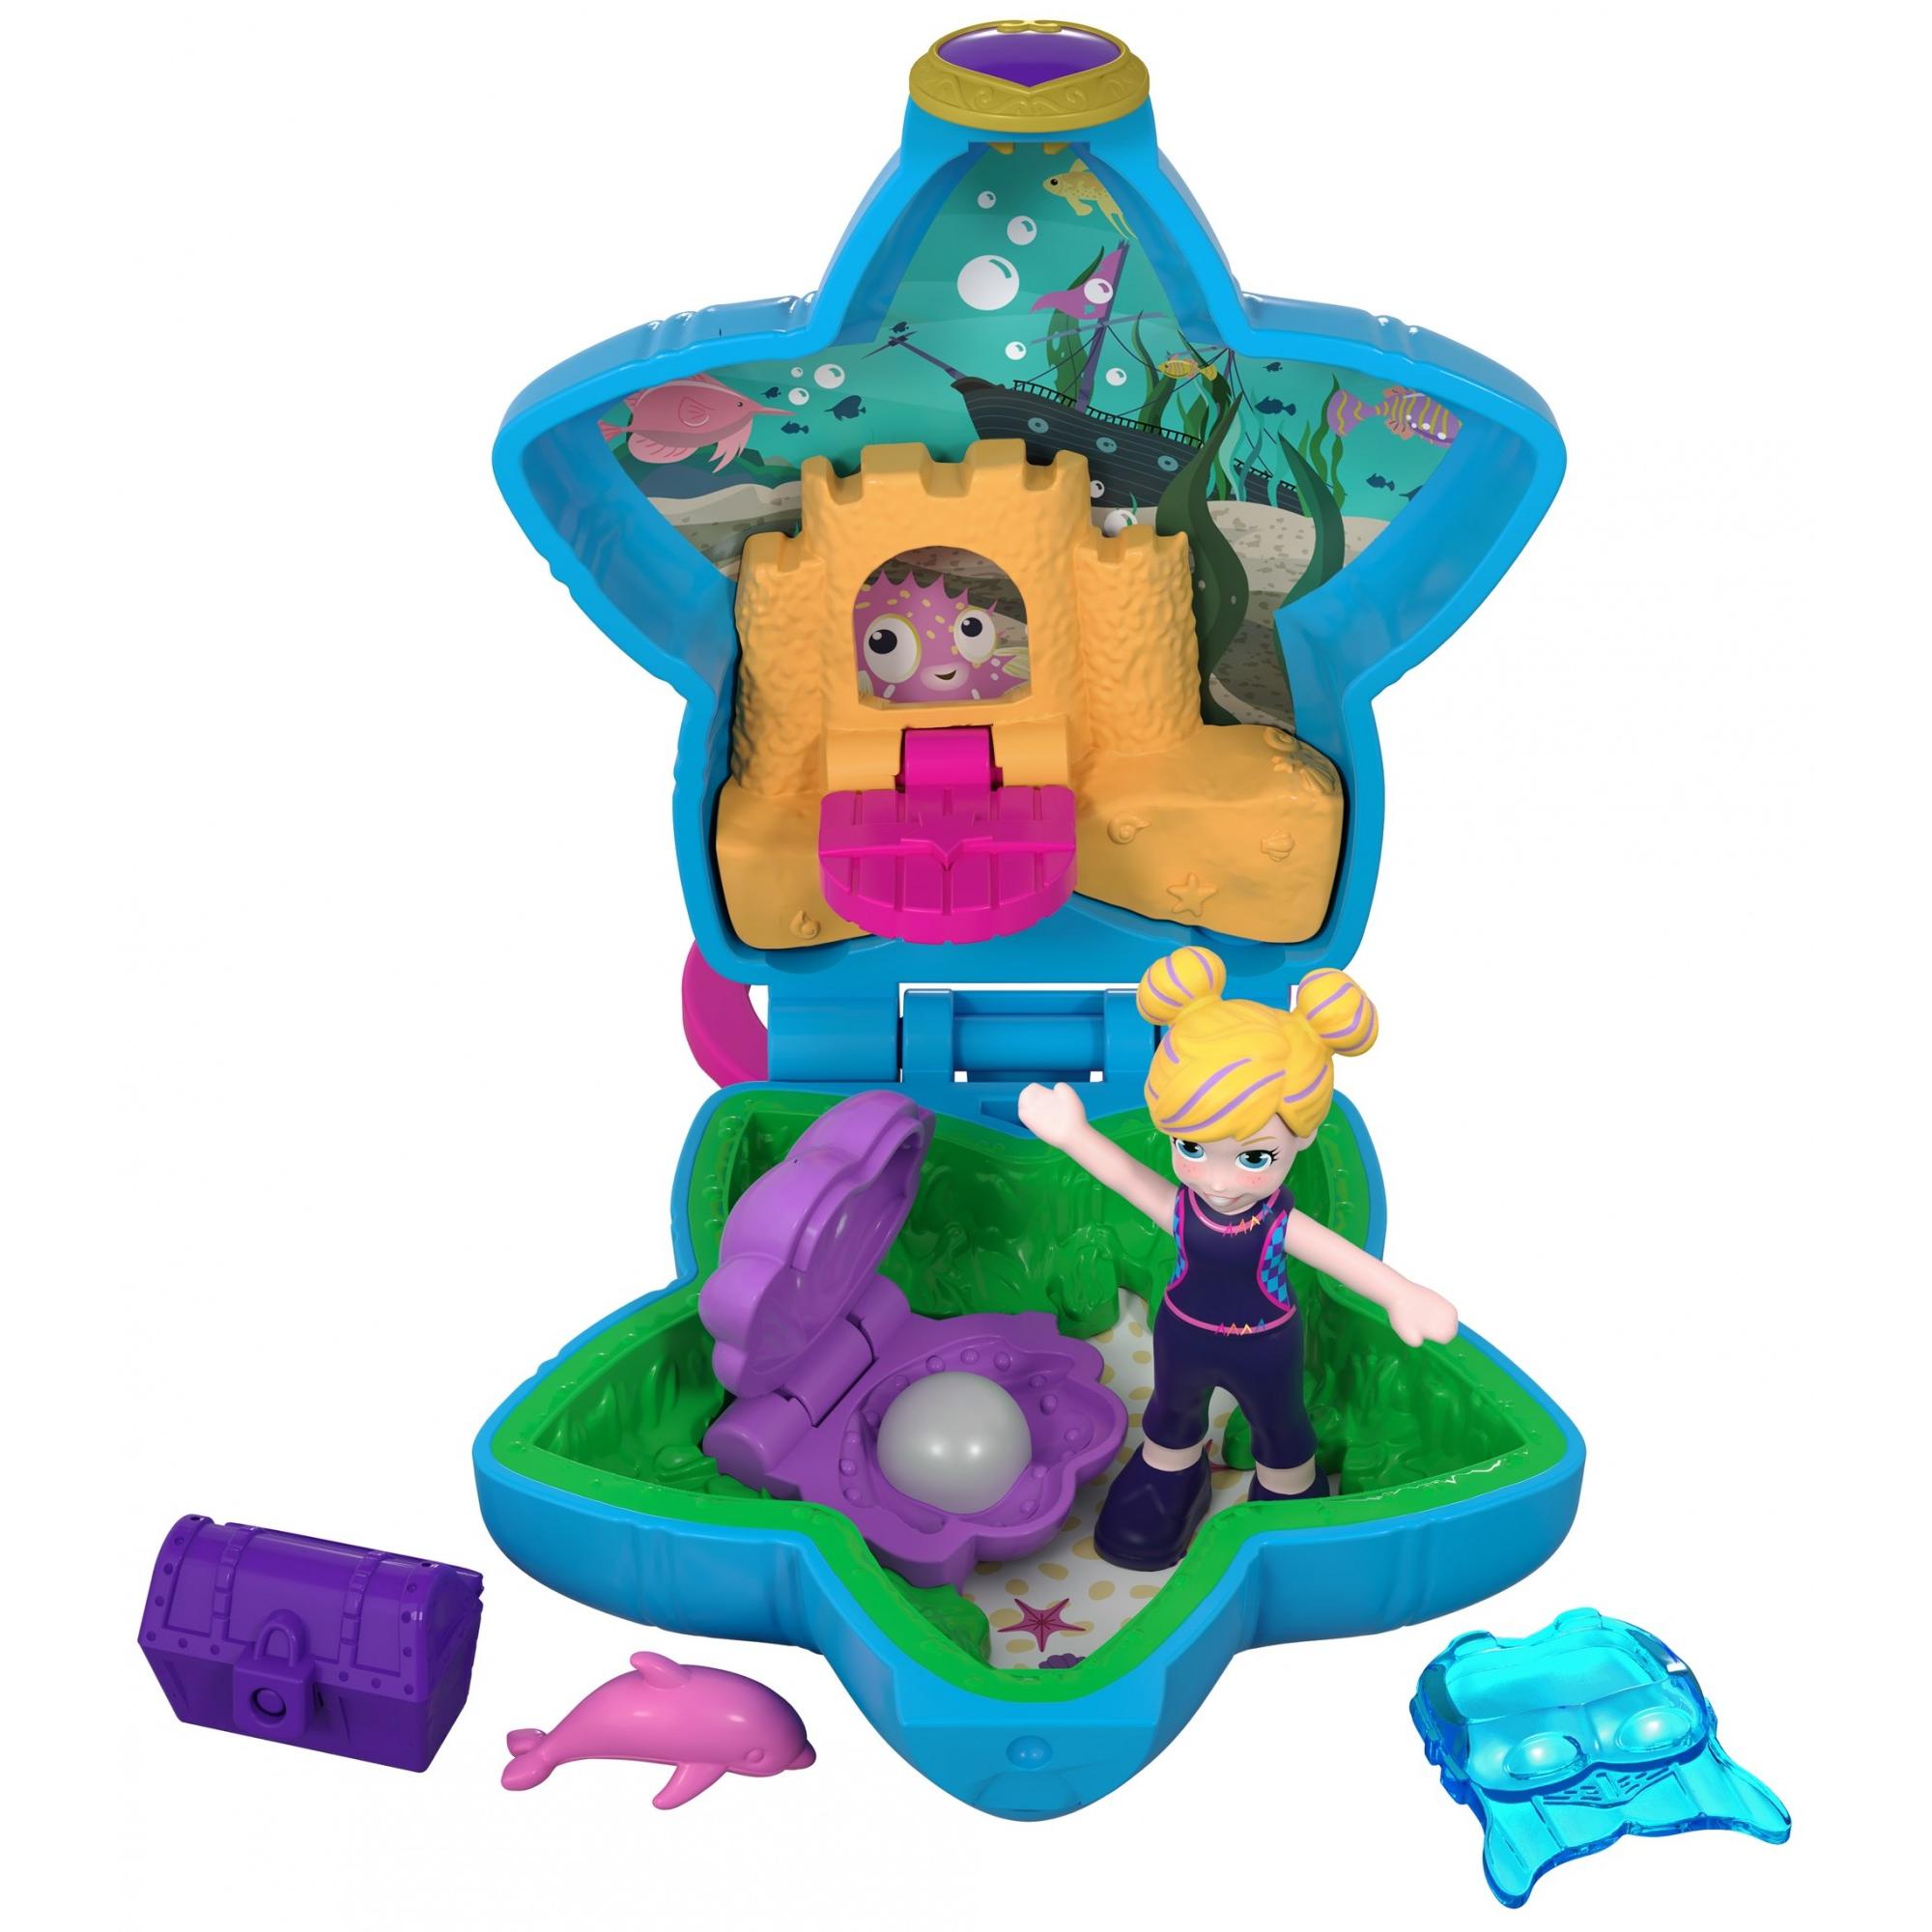 Polly Pocket Tiny Pocket Places Aqua Awesome Aquarium Compact with Micro Doll and Dolphin - image 1 of 8